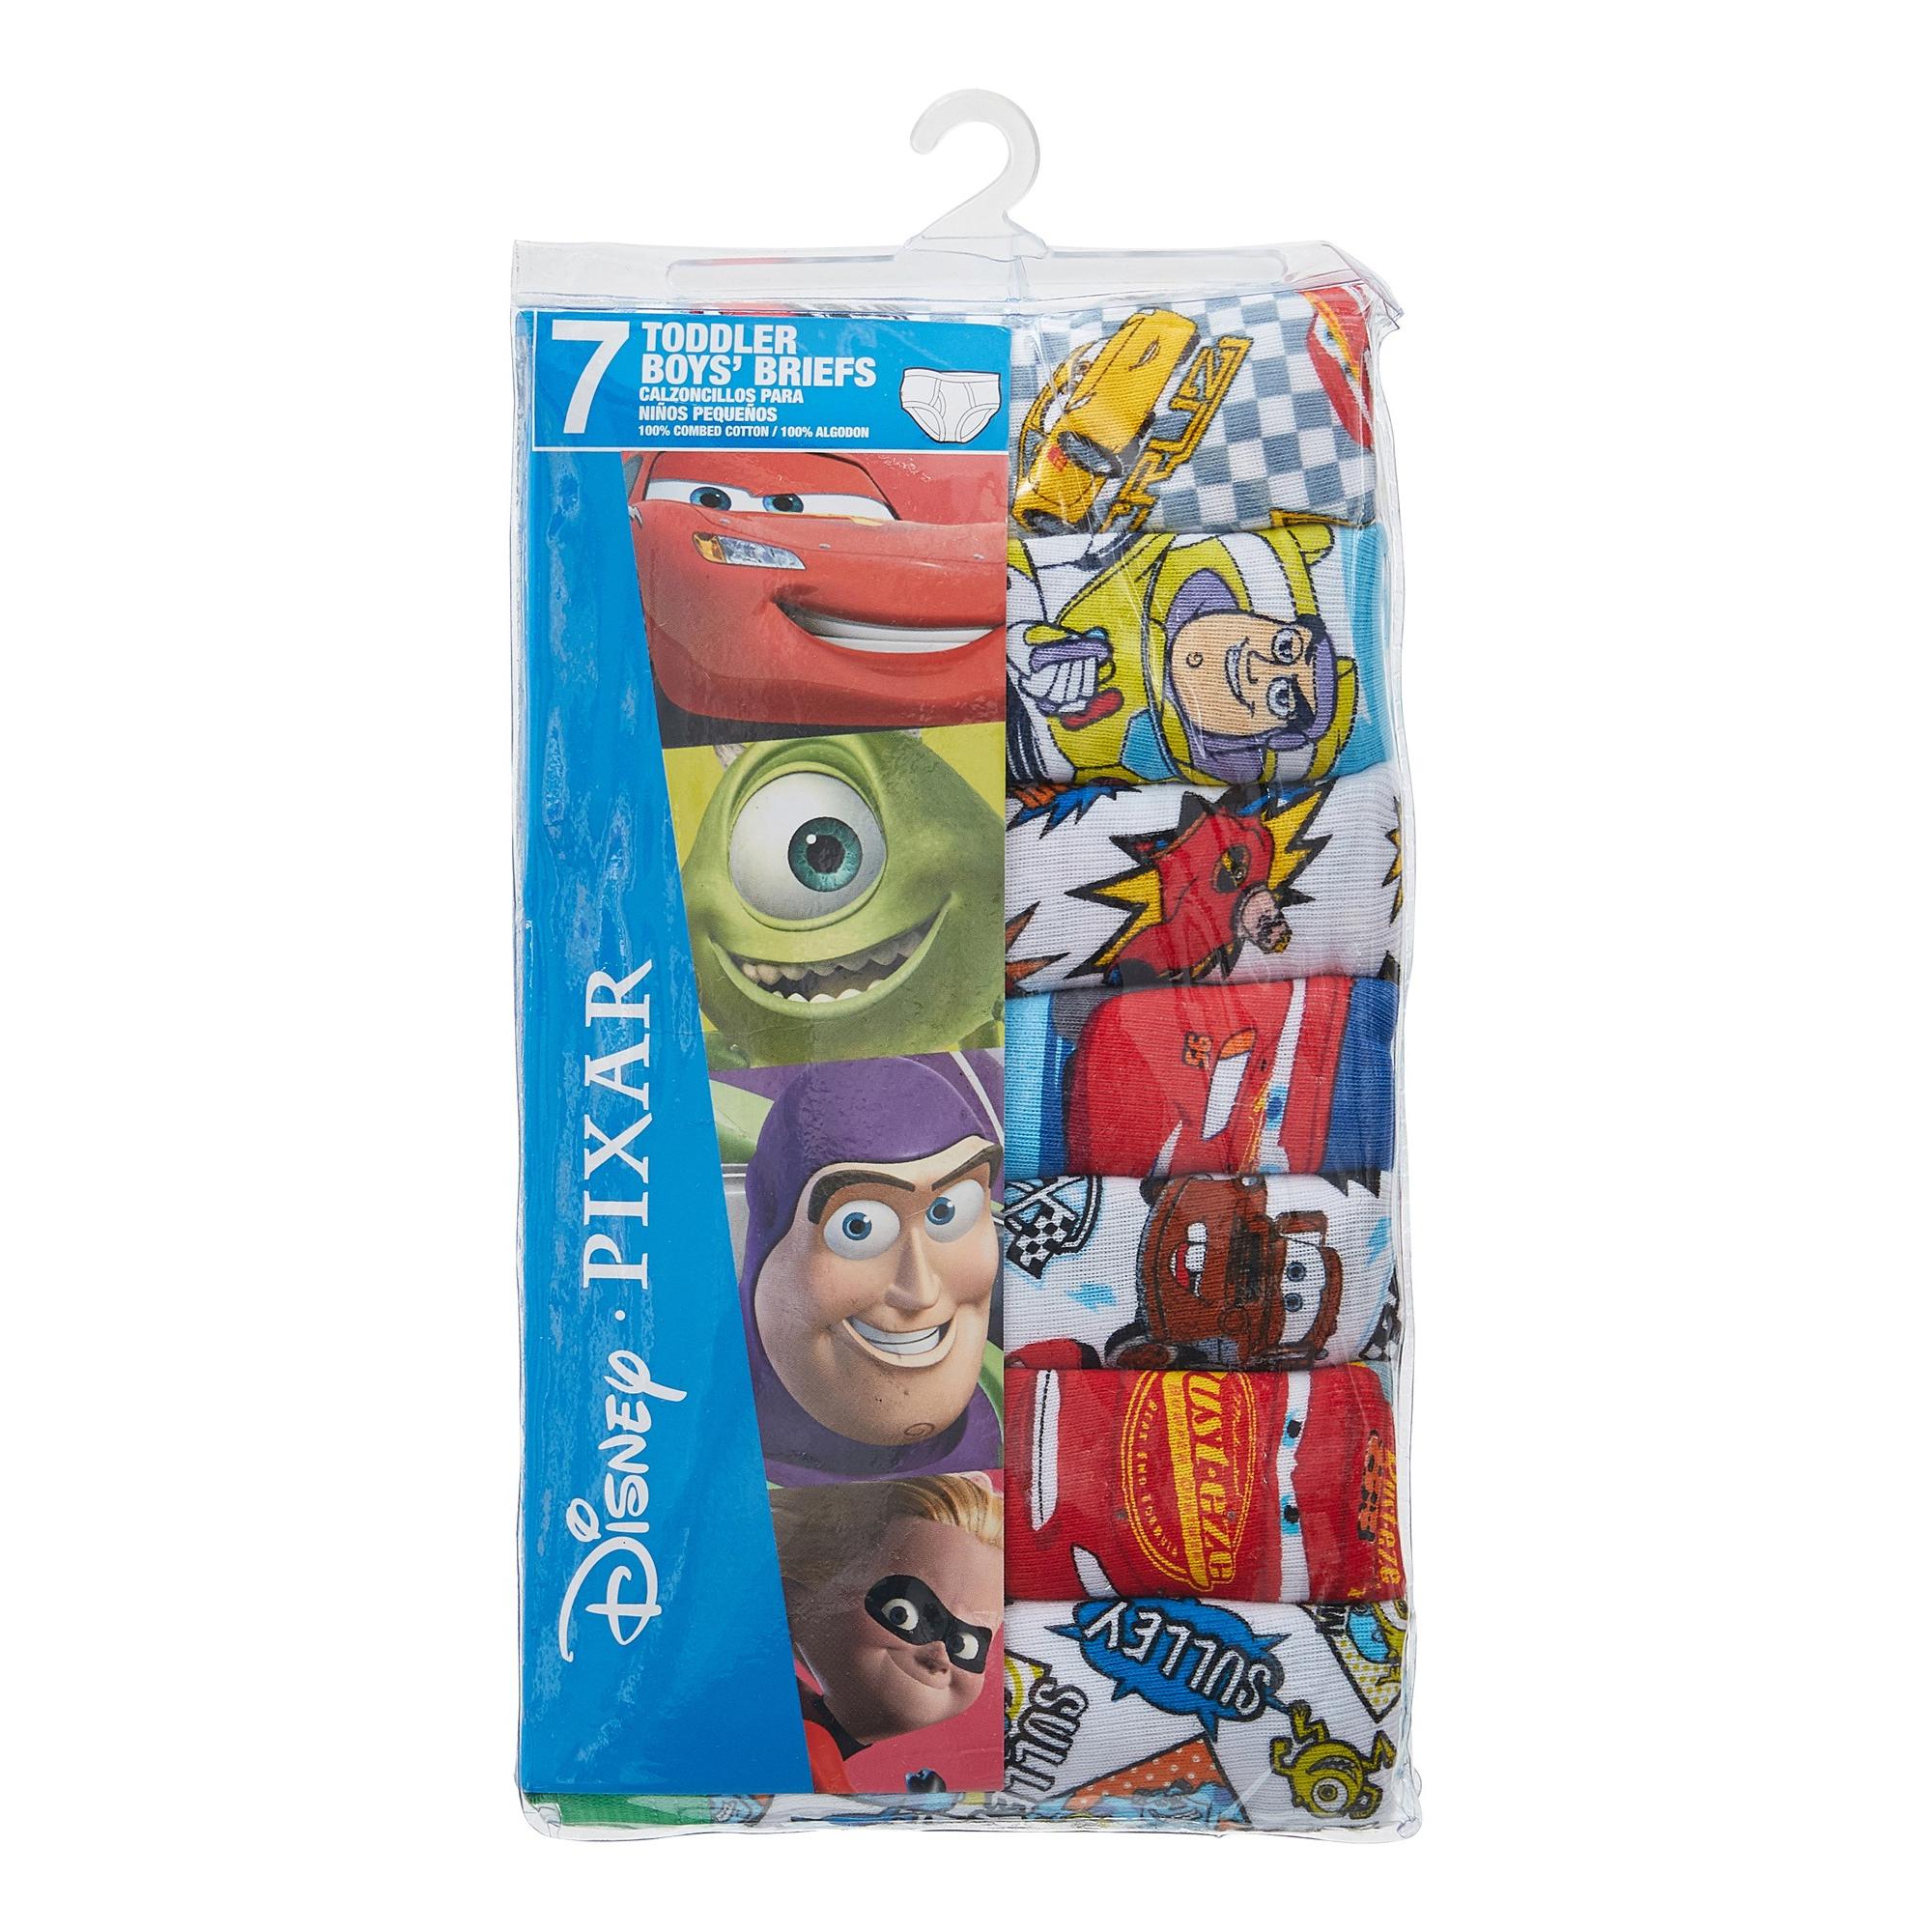 Cars, Toy Story & Monsters Inc. Variety Toddler Boy Brief Underwear, 7-Pack, Sizes 3T-4T - image 3 of 3